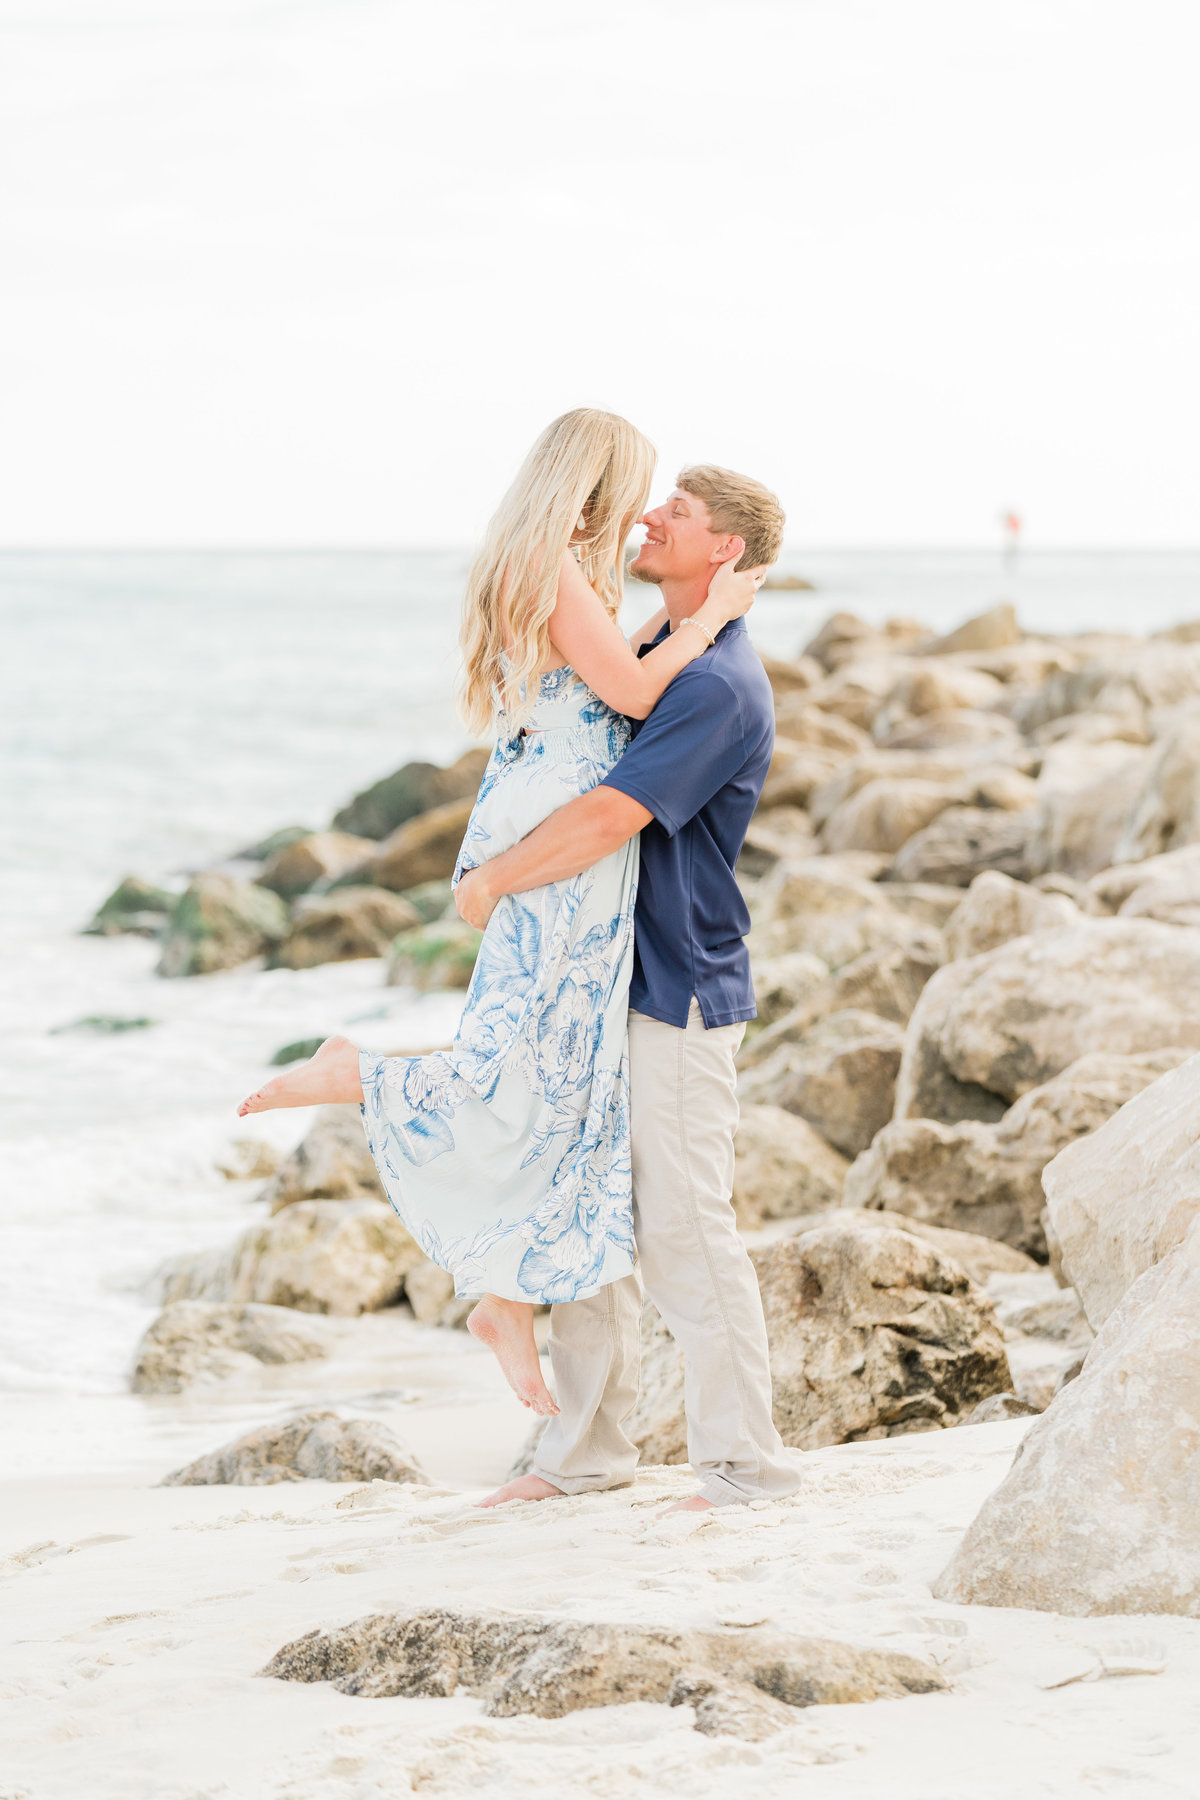 Engagement photoshoot at beach in Alabama